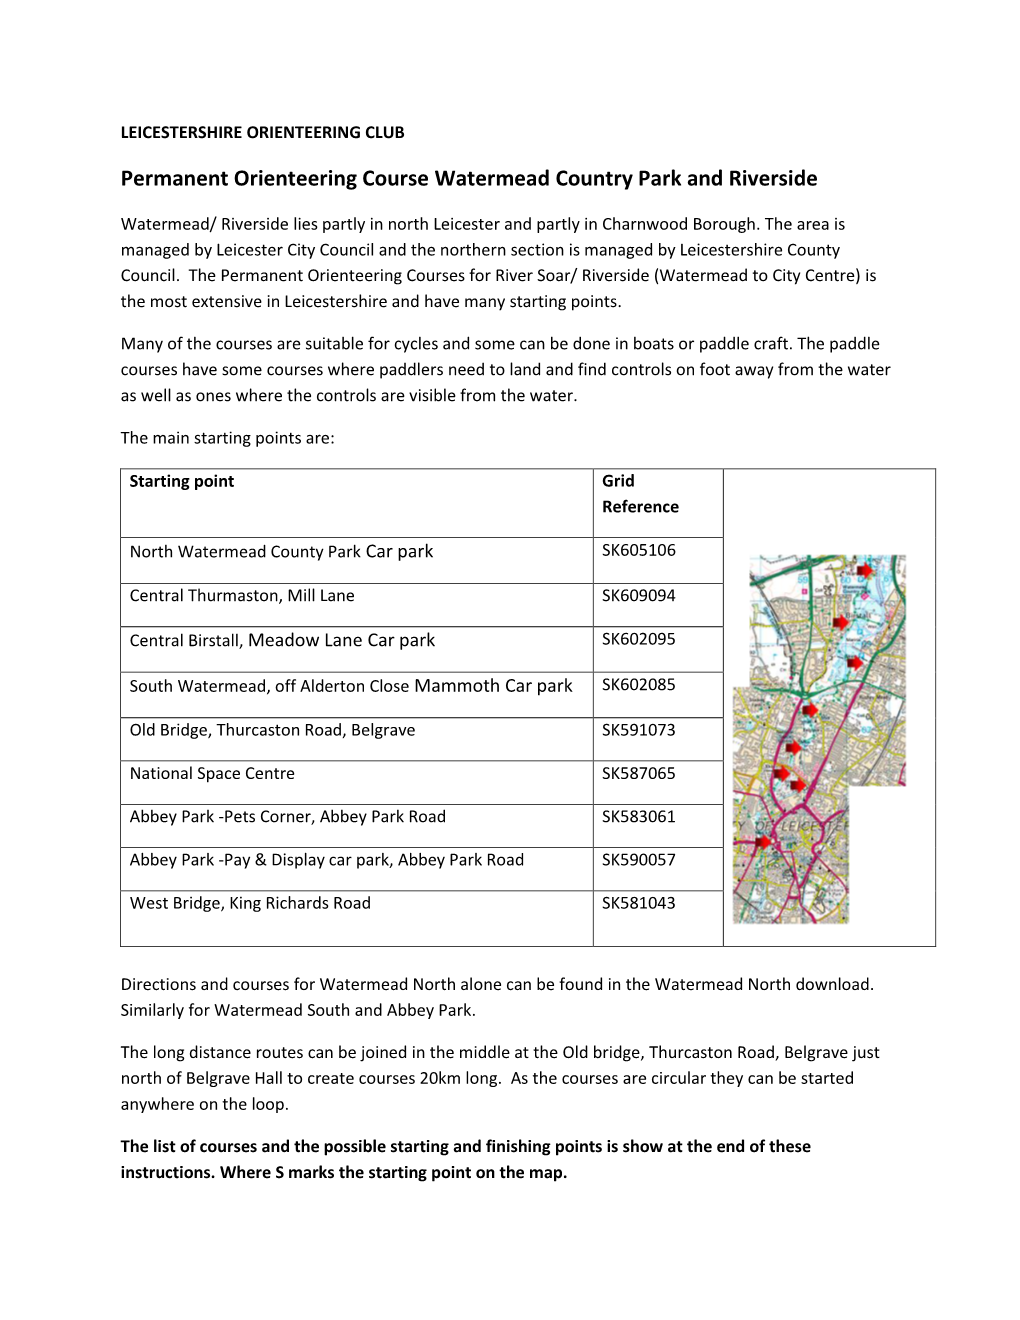 Permanent Orienteering Course Watermead Country Park and Riverside